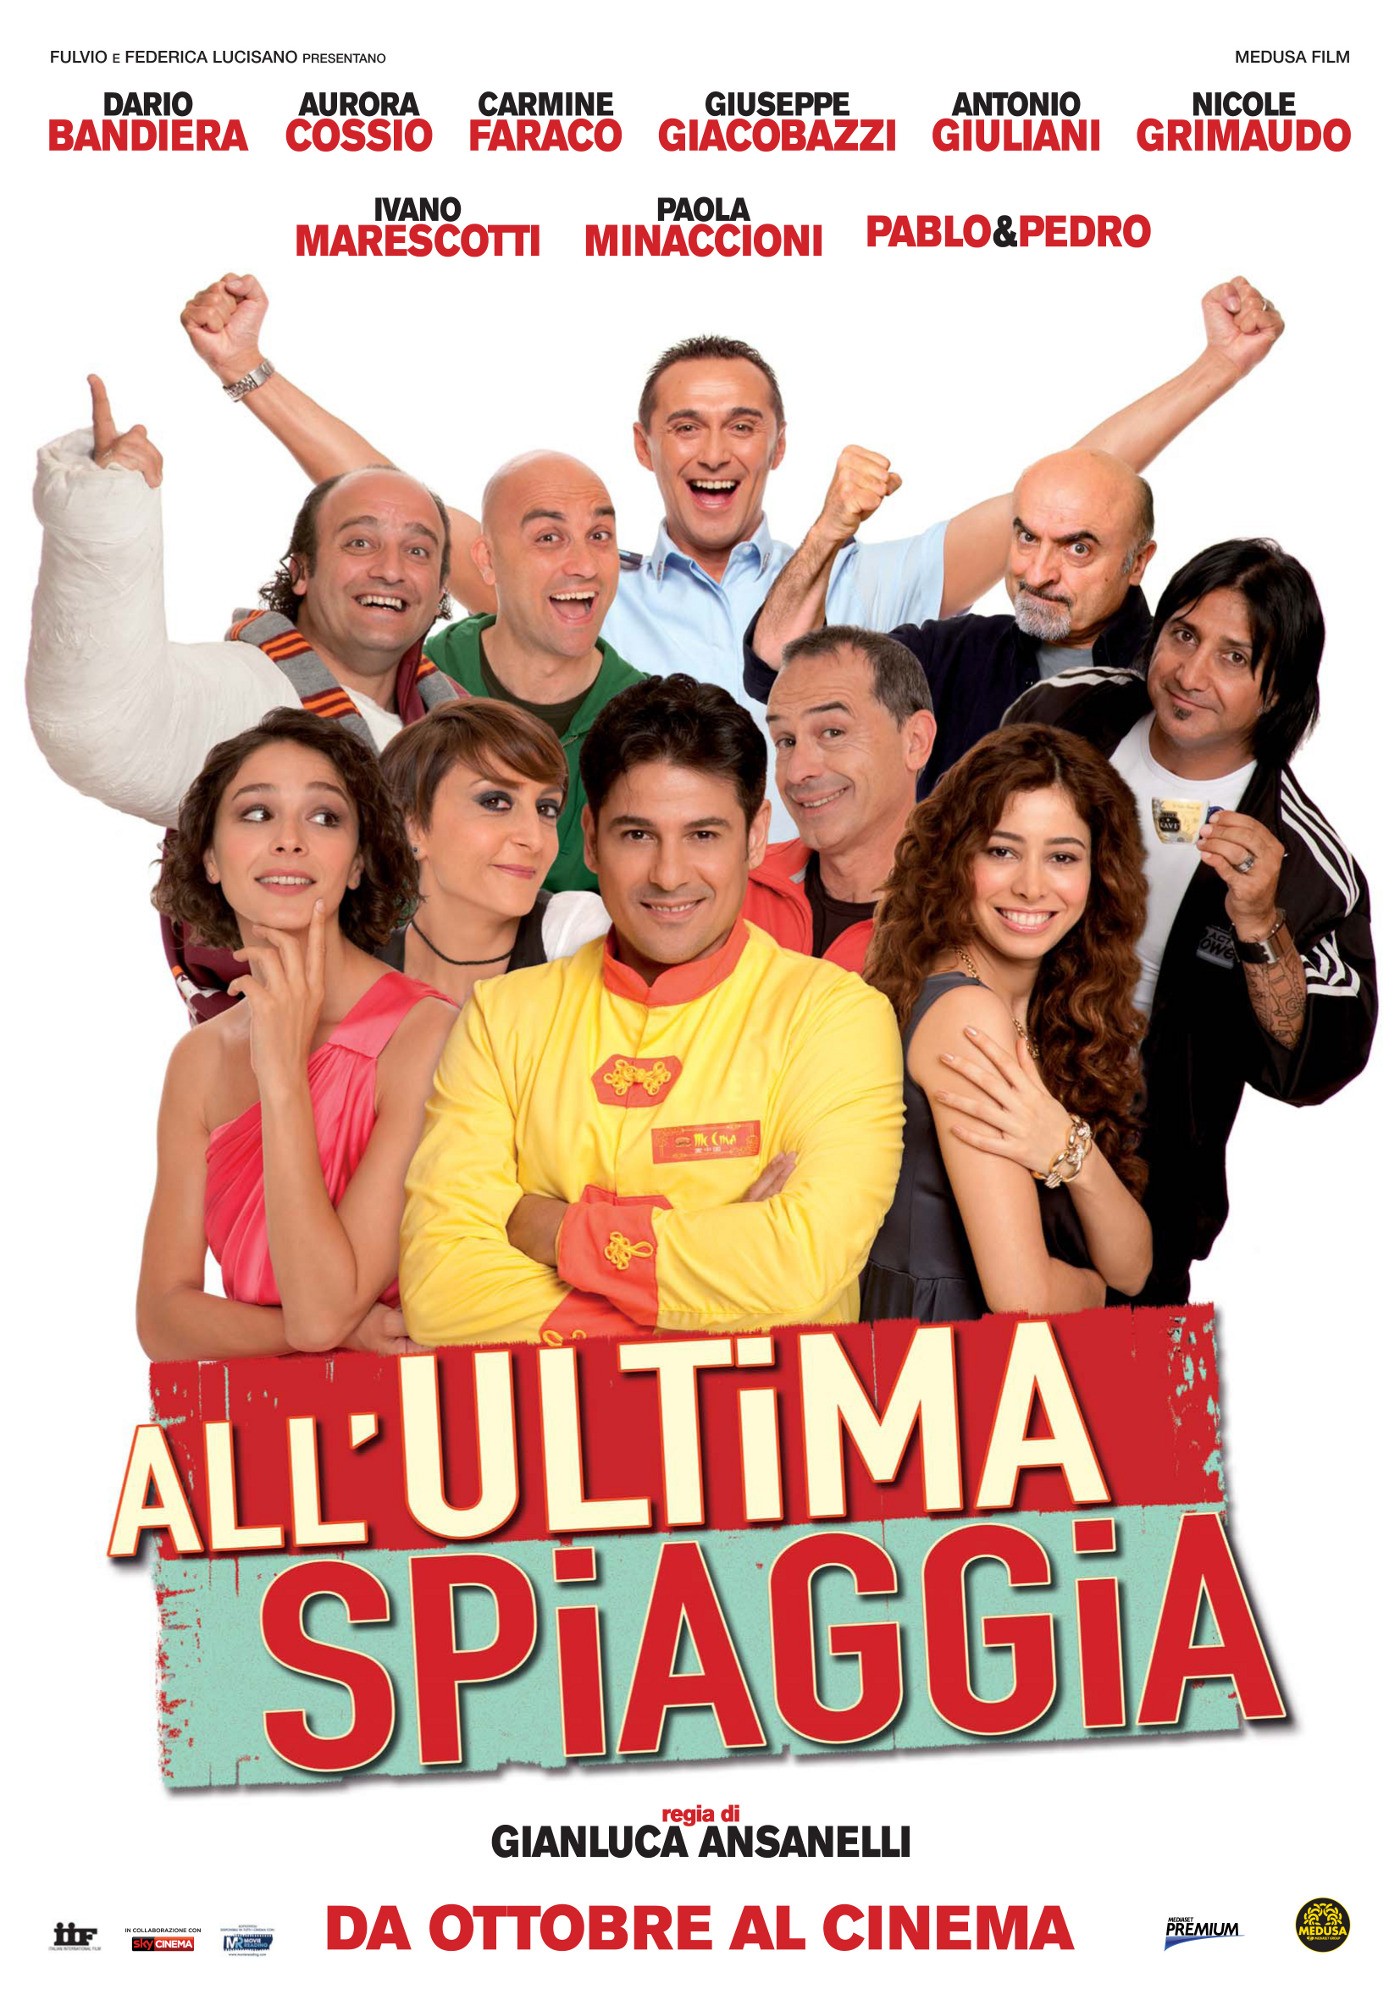 Mega Sized Movie Poster Image for All'ultima spiaggia 